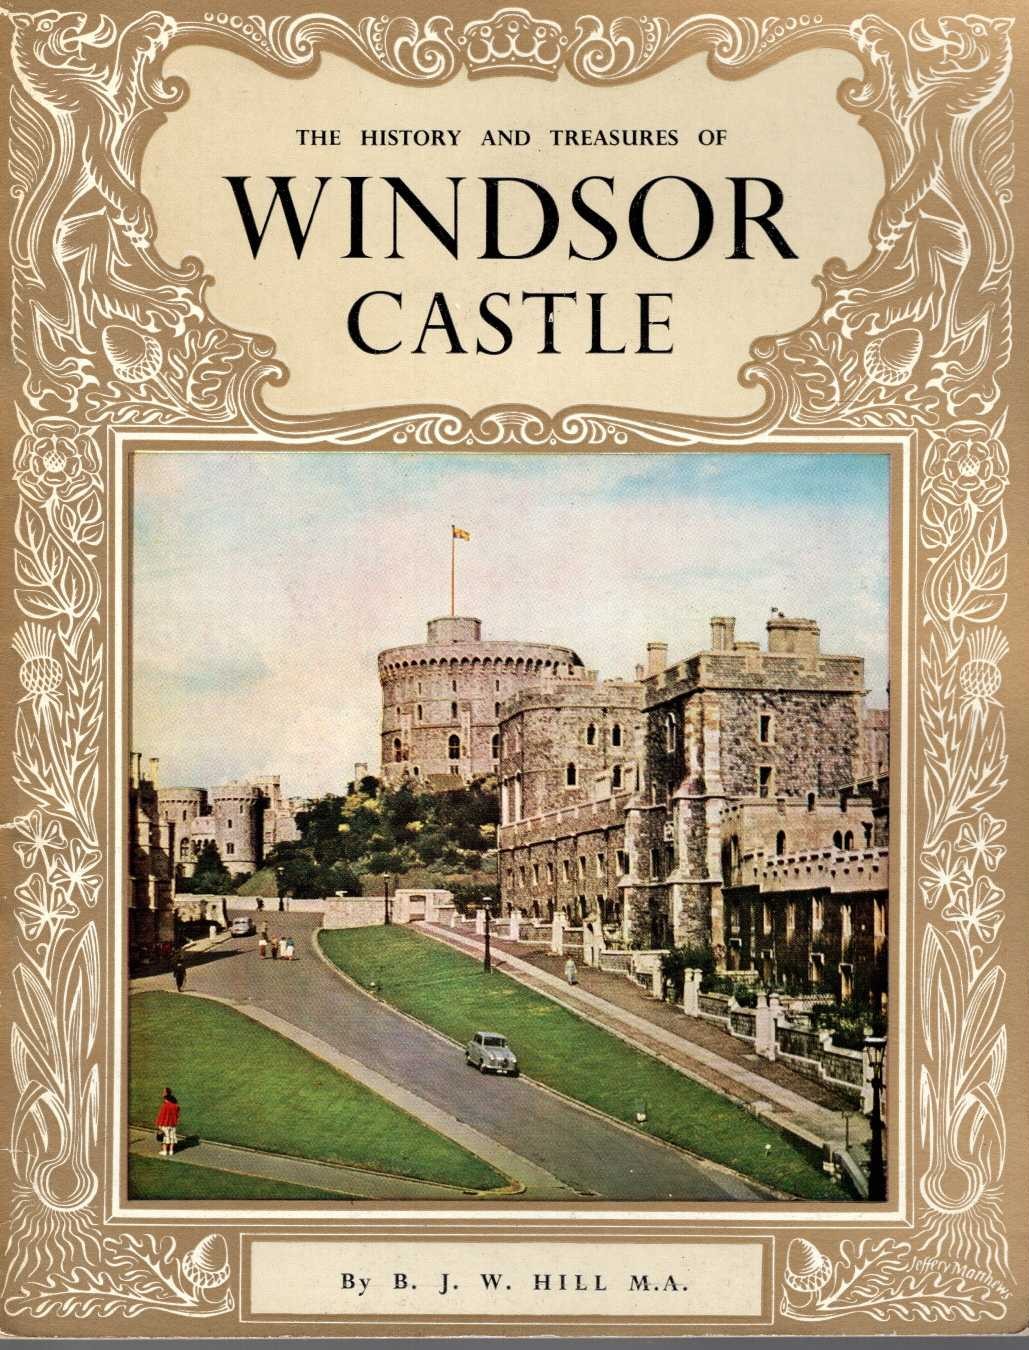 WINDSOR CASTLE, The history and treasures of by B.J.W.Hill  front book cover image